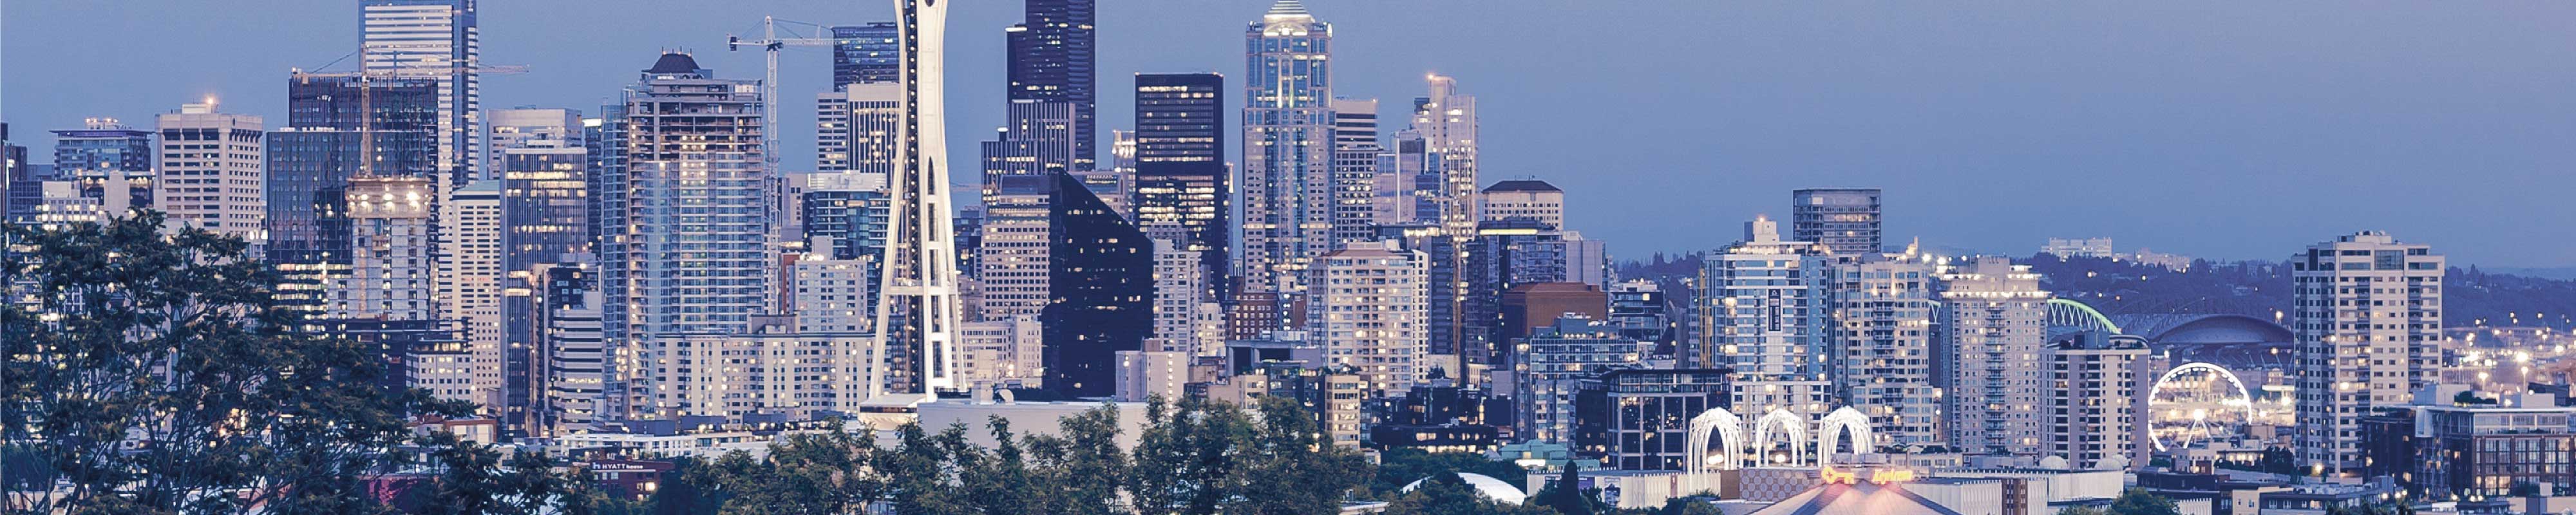 Consigna Equipaje | Nordstrom Downtown Seattle en Seattle - Nannybag